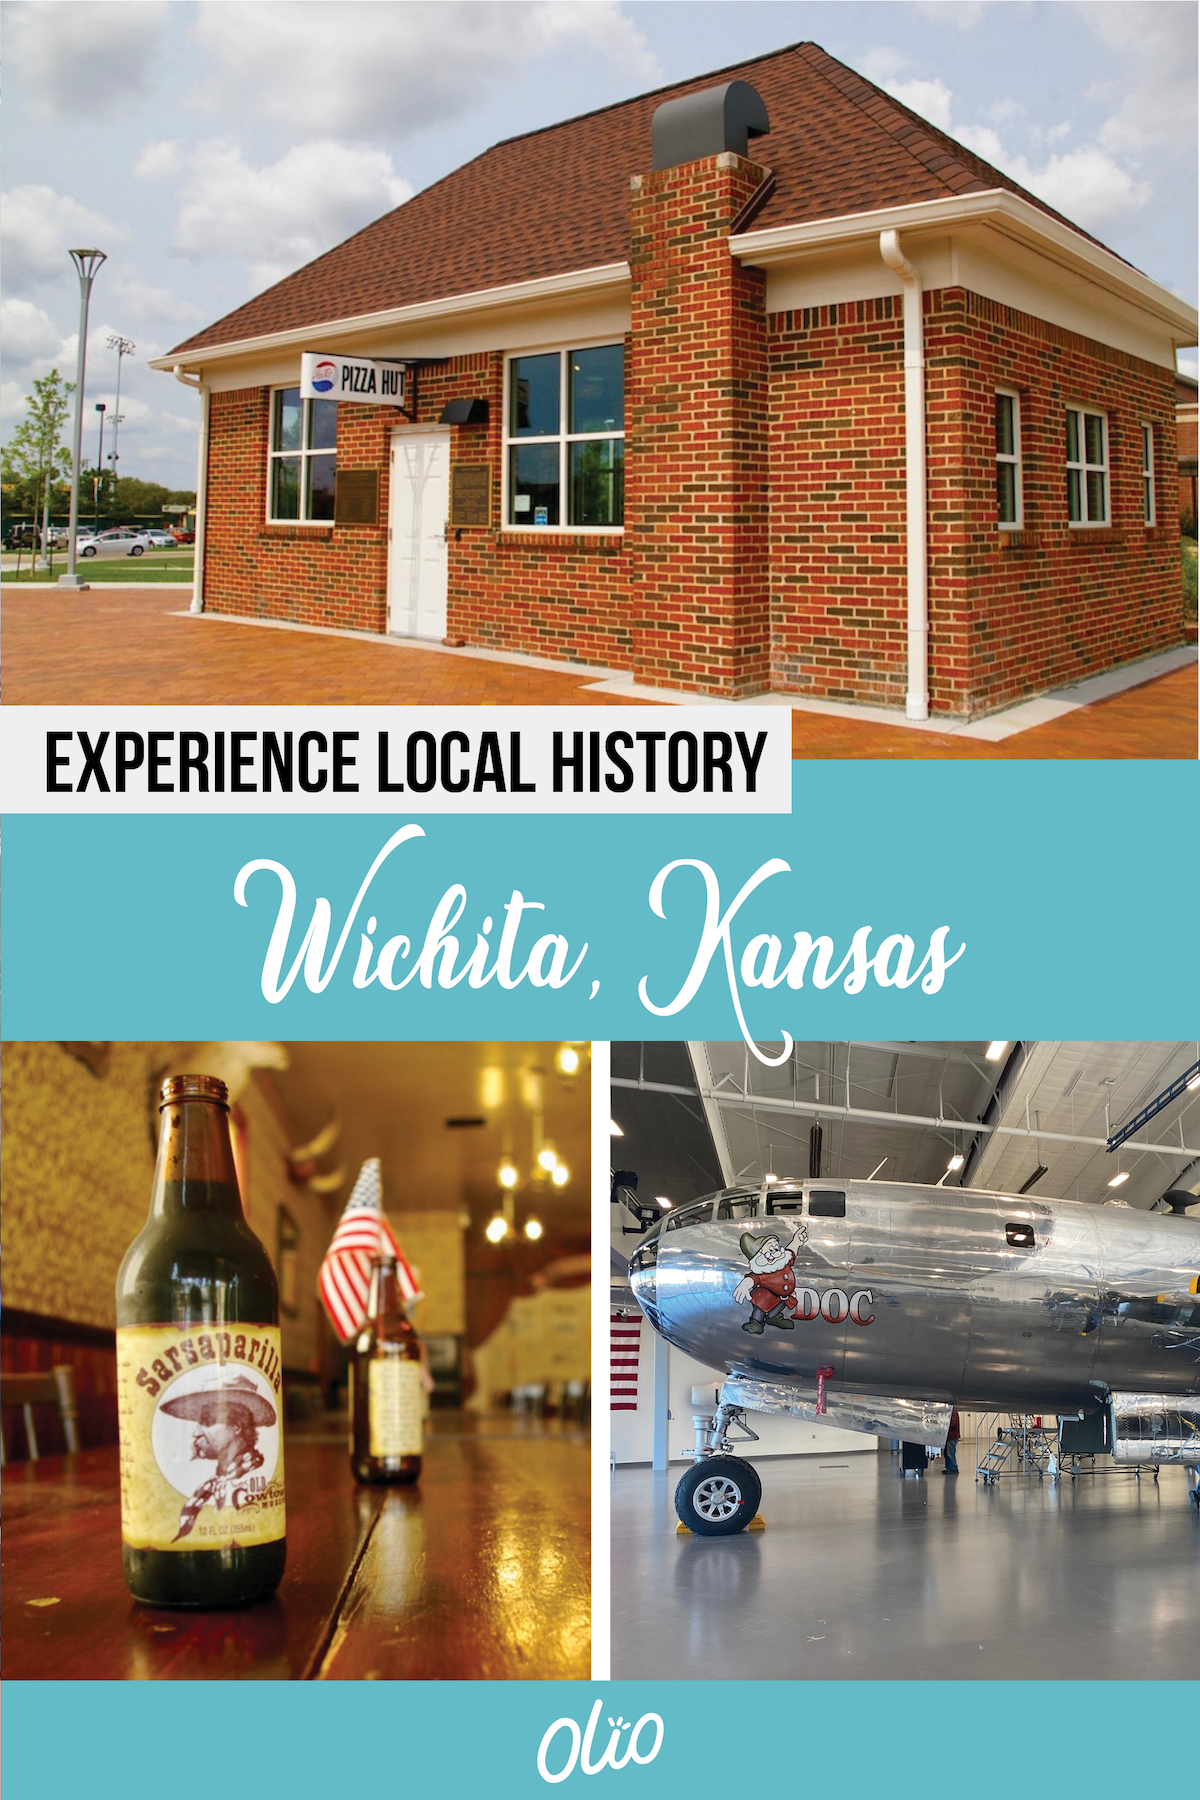 Interested in experiencing the history of Wichita, Kansas? This Kansas community has a rich history from aviation to African American culture to the start of one of the country's most prominent pizza chains. With museums, historic sites and more, you're sure to learn something new when you visit Wichita. #Wichita #Kansas #Midwest #History #LocalHistory